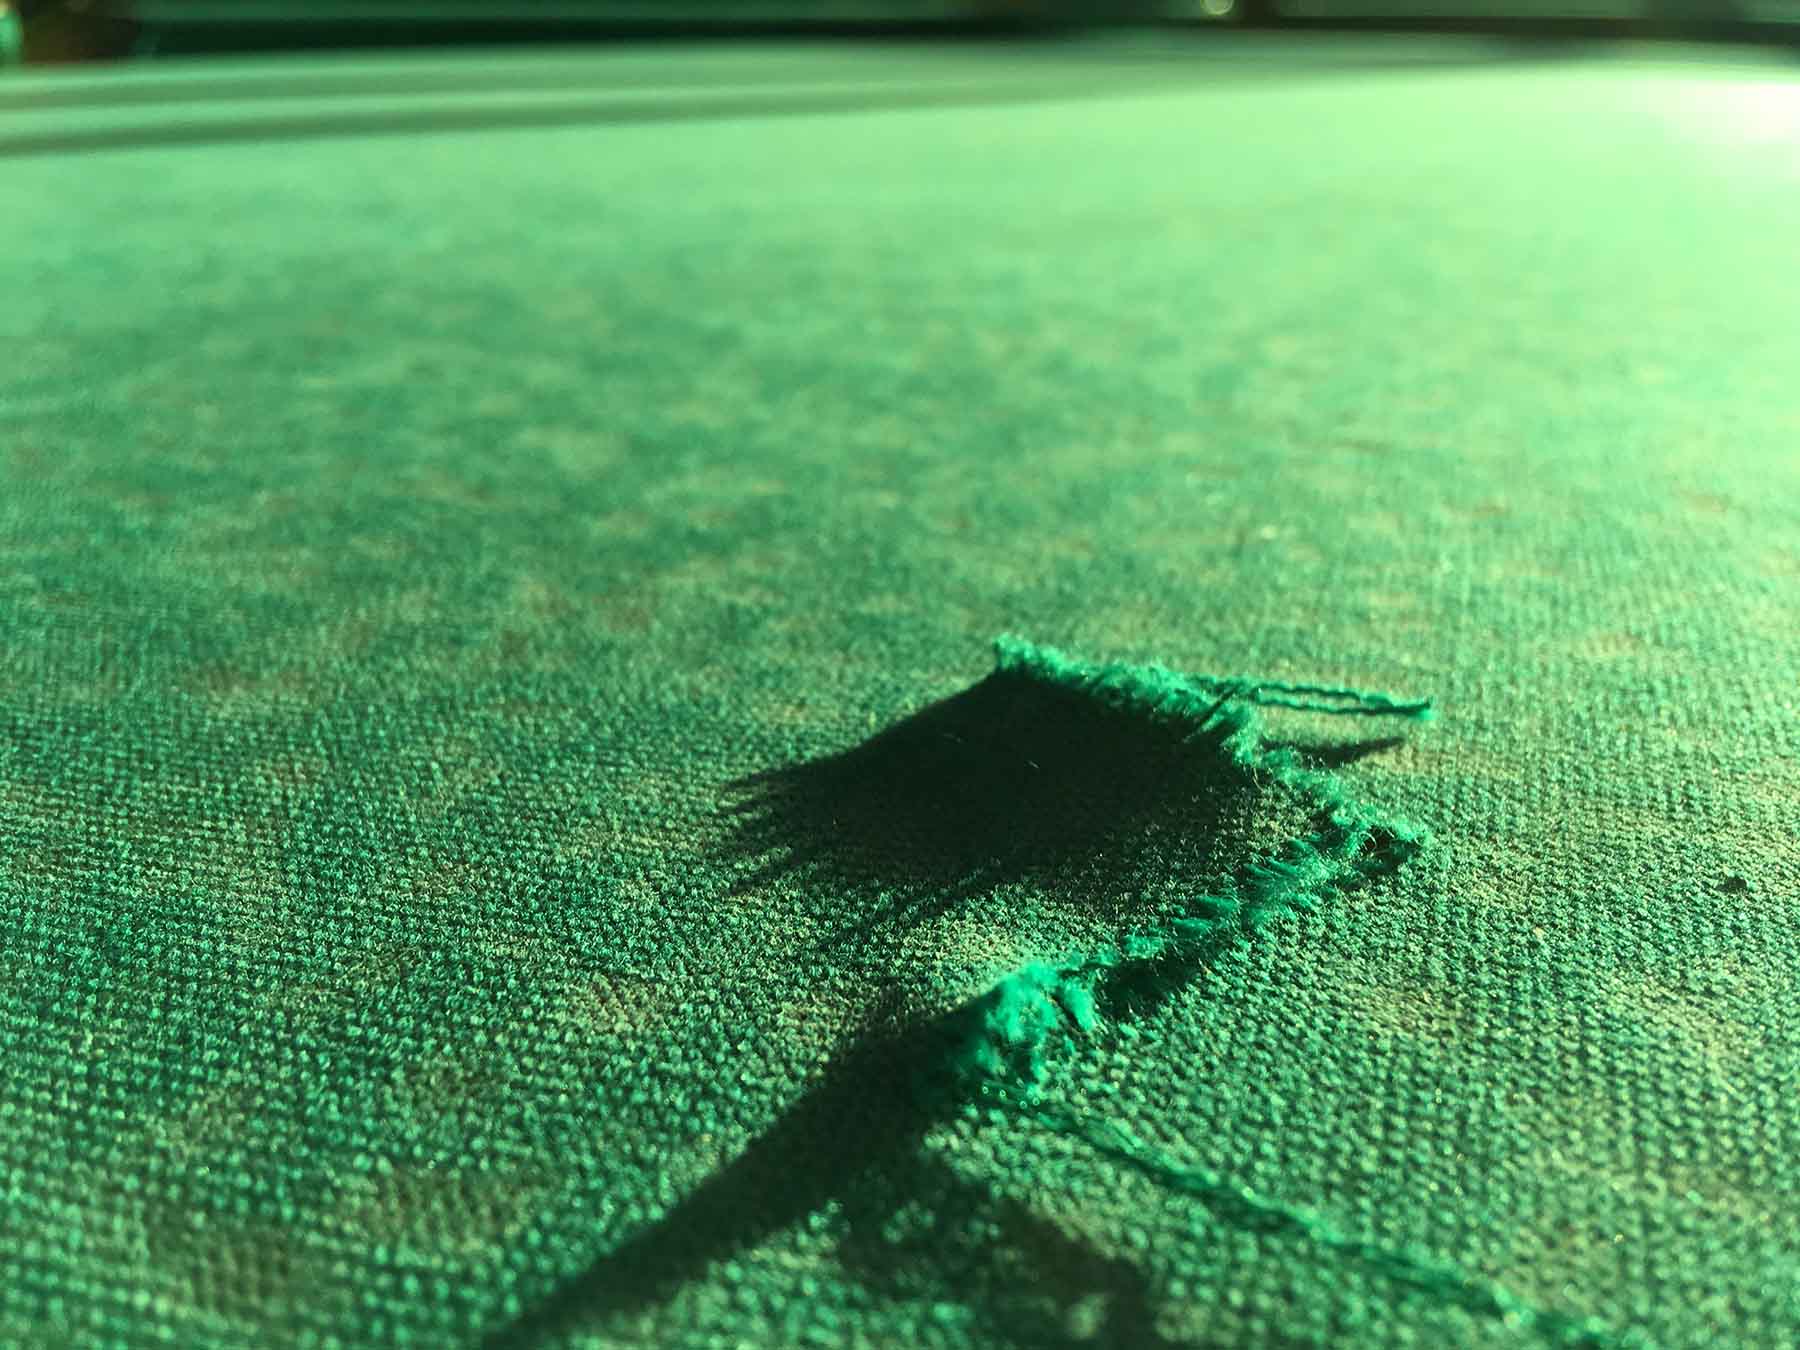 Damage to the pool table. Torn cloth on the pool table